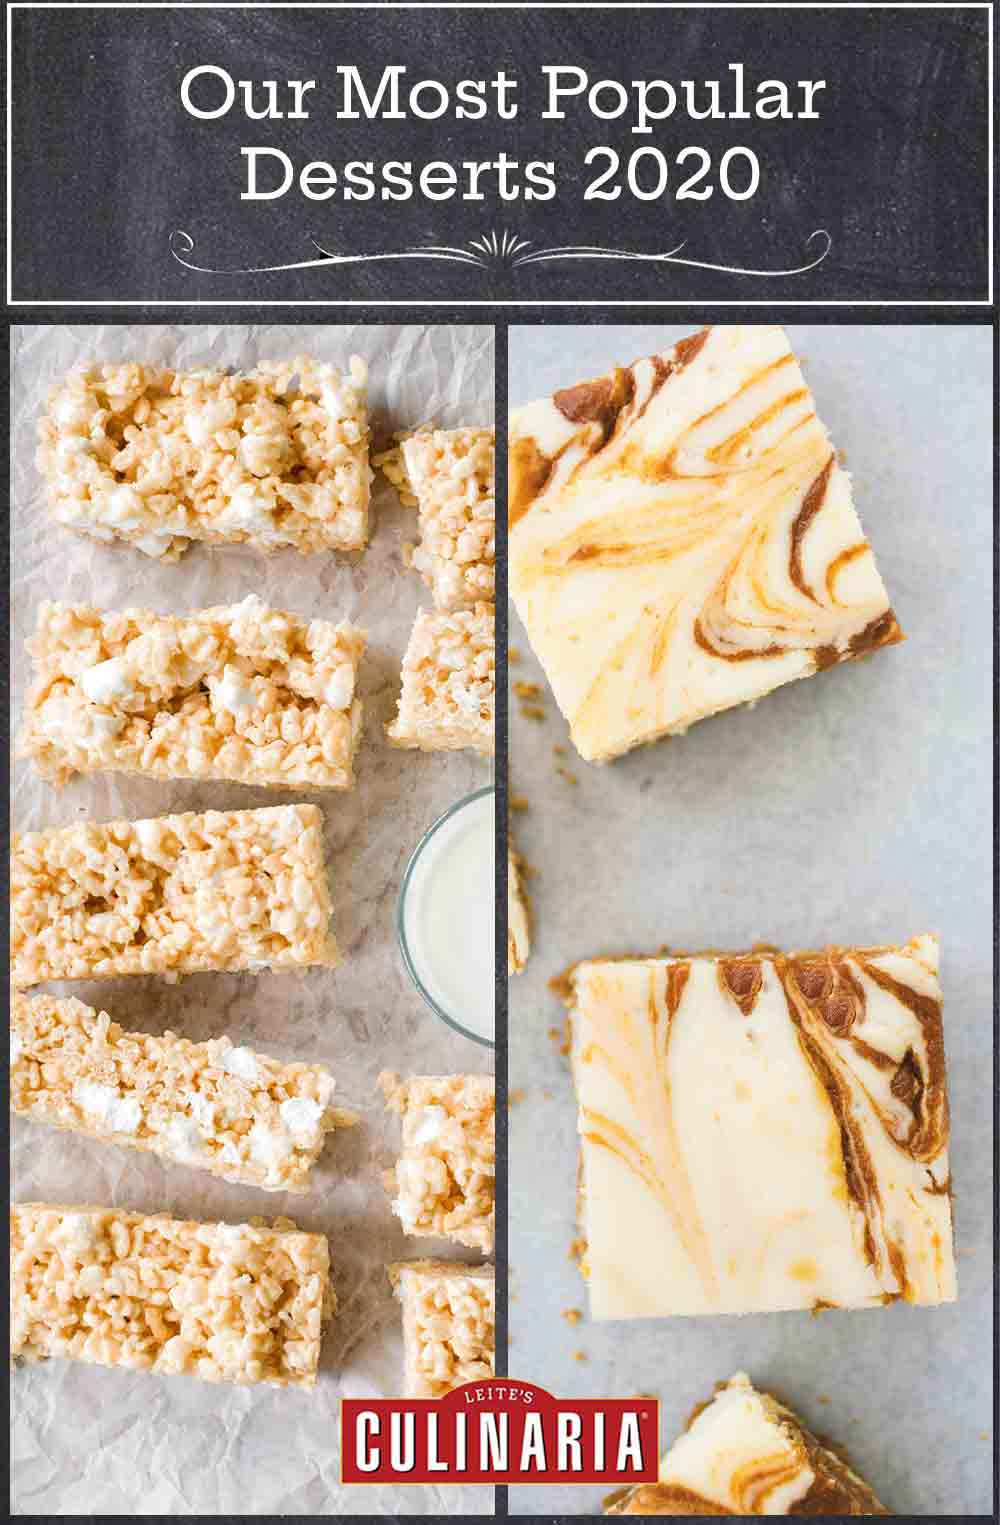 Images of two of the most popular desserts 2020 -- brown butter rice krispie squares and pumpkin swirl cheesecake bars.